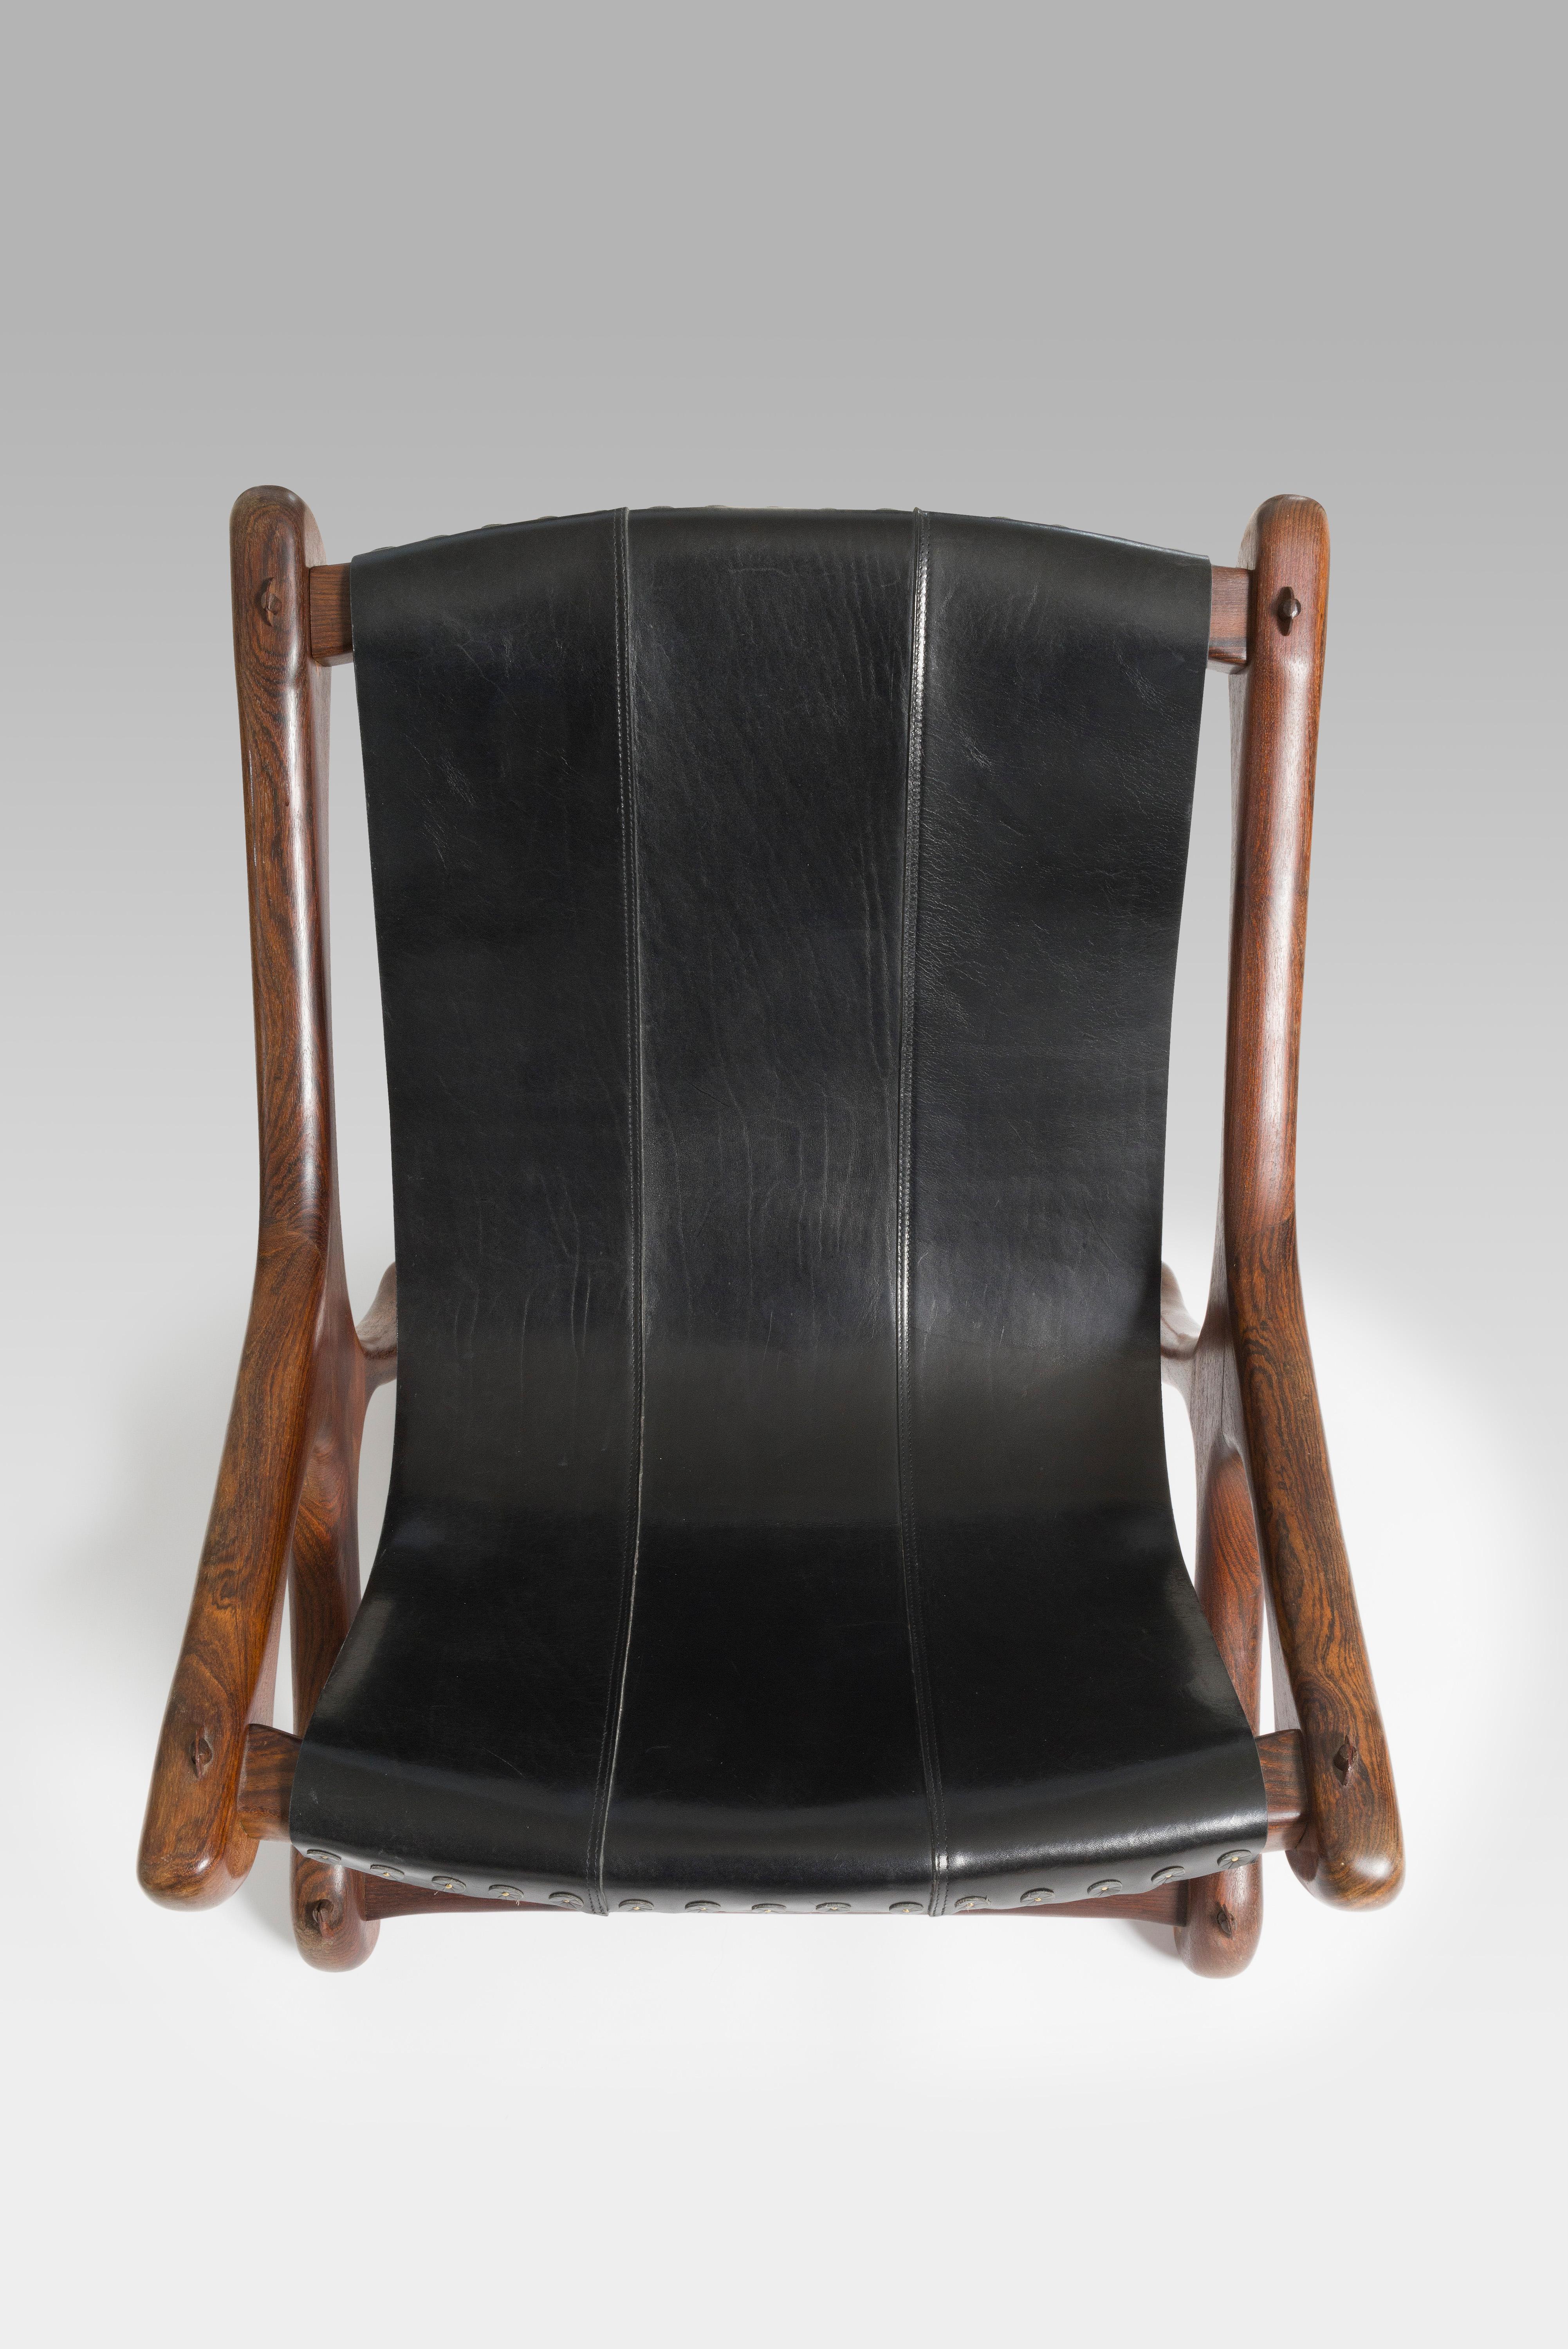 Mexican Modern Lounge Chair, Wood and Leather, 1960's In Good Condition For Sale In Uccle, BE